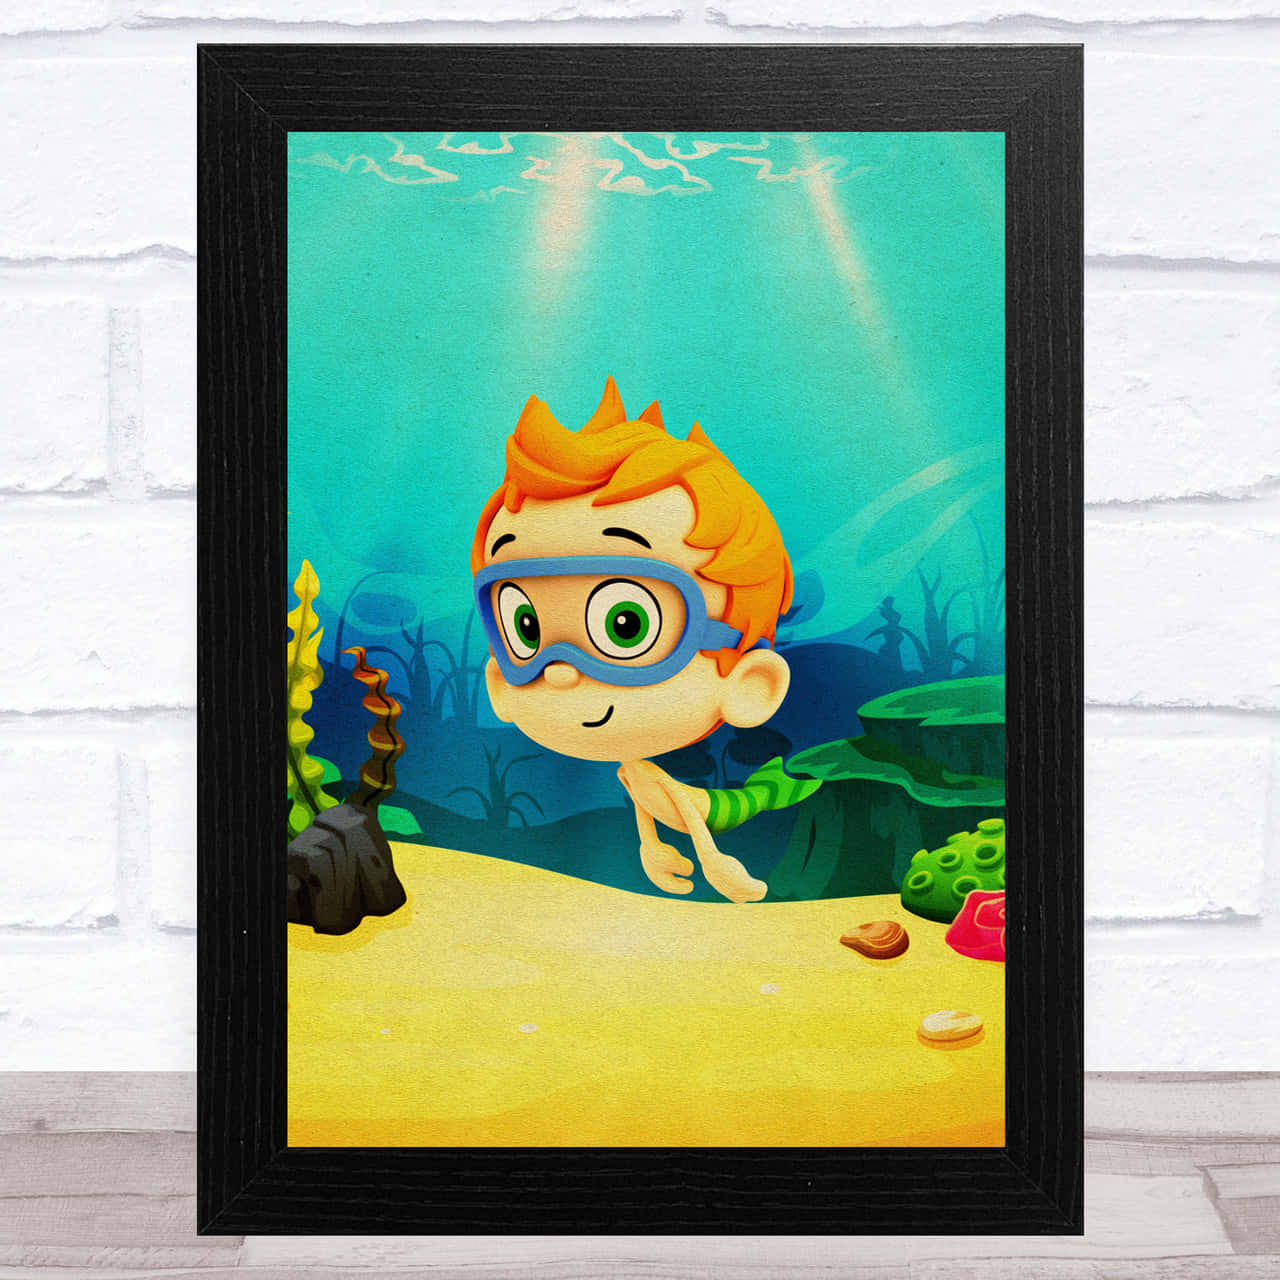 Enjoy bubble-bursts of fun with the Bubble Guppies!